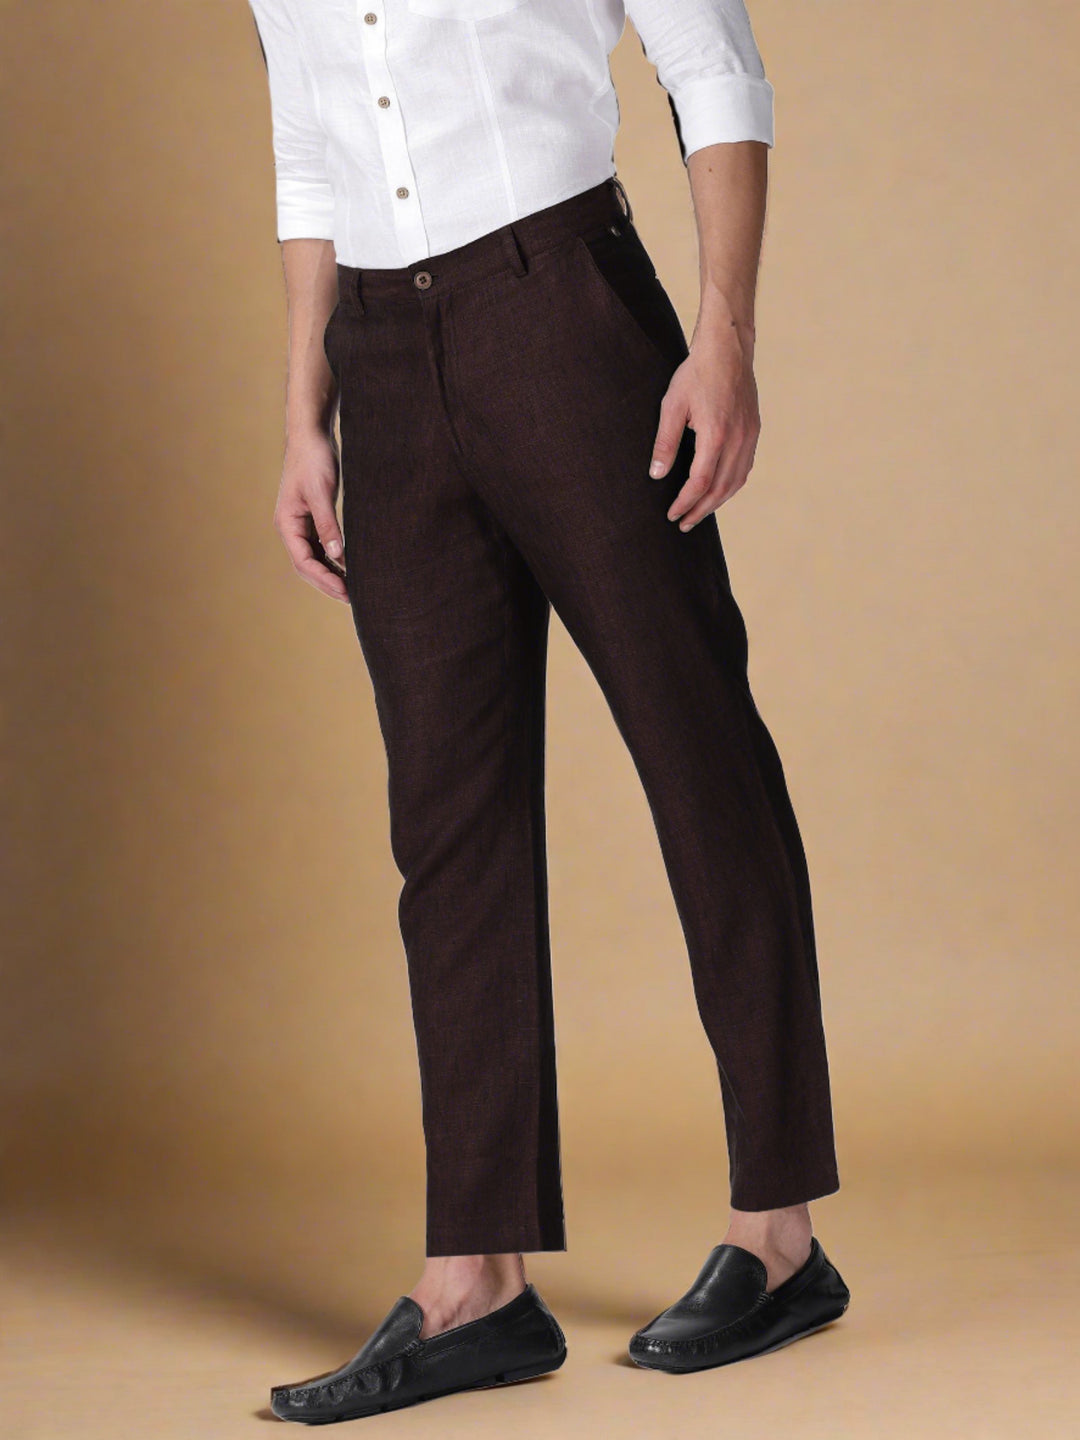 Ian Pure Linen Trousers - Cocoa Brown